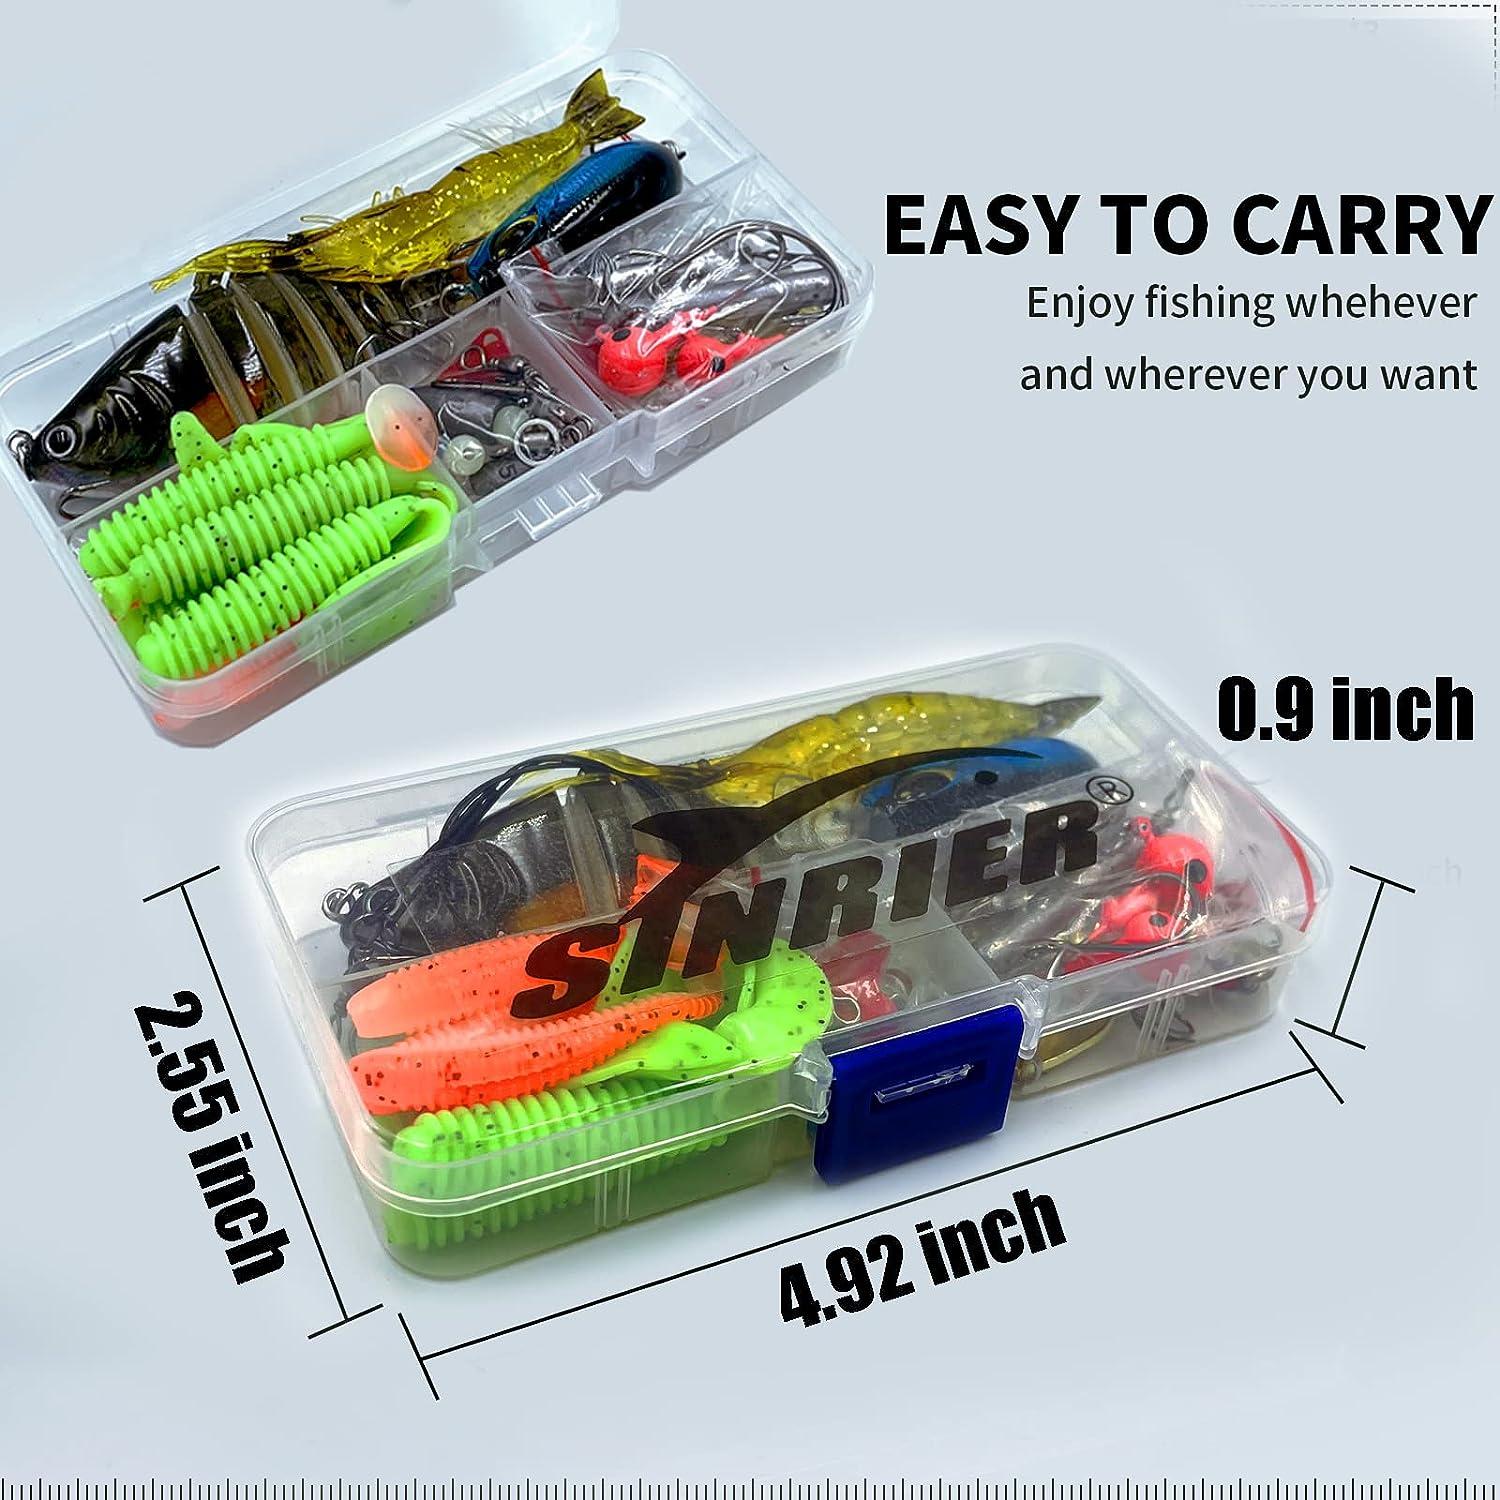 Sinrier Fishing Lures Kit for Freshwater Bait Tackle Kit for Fly